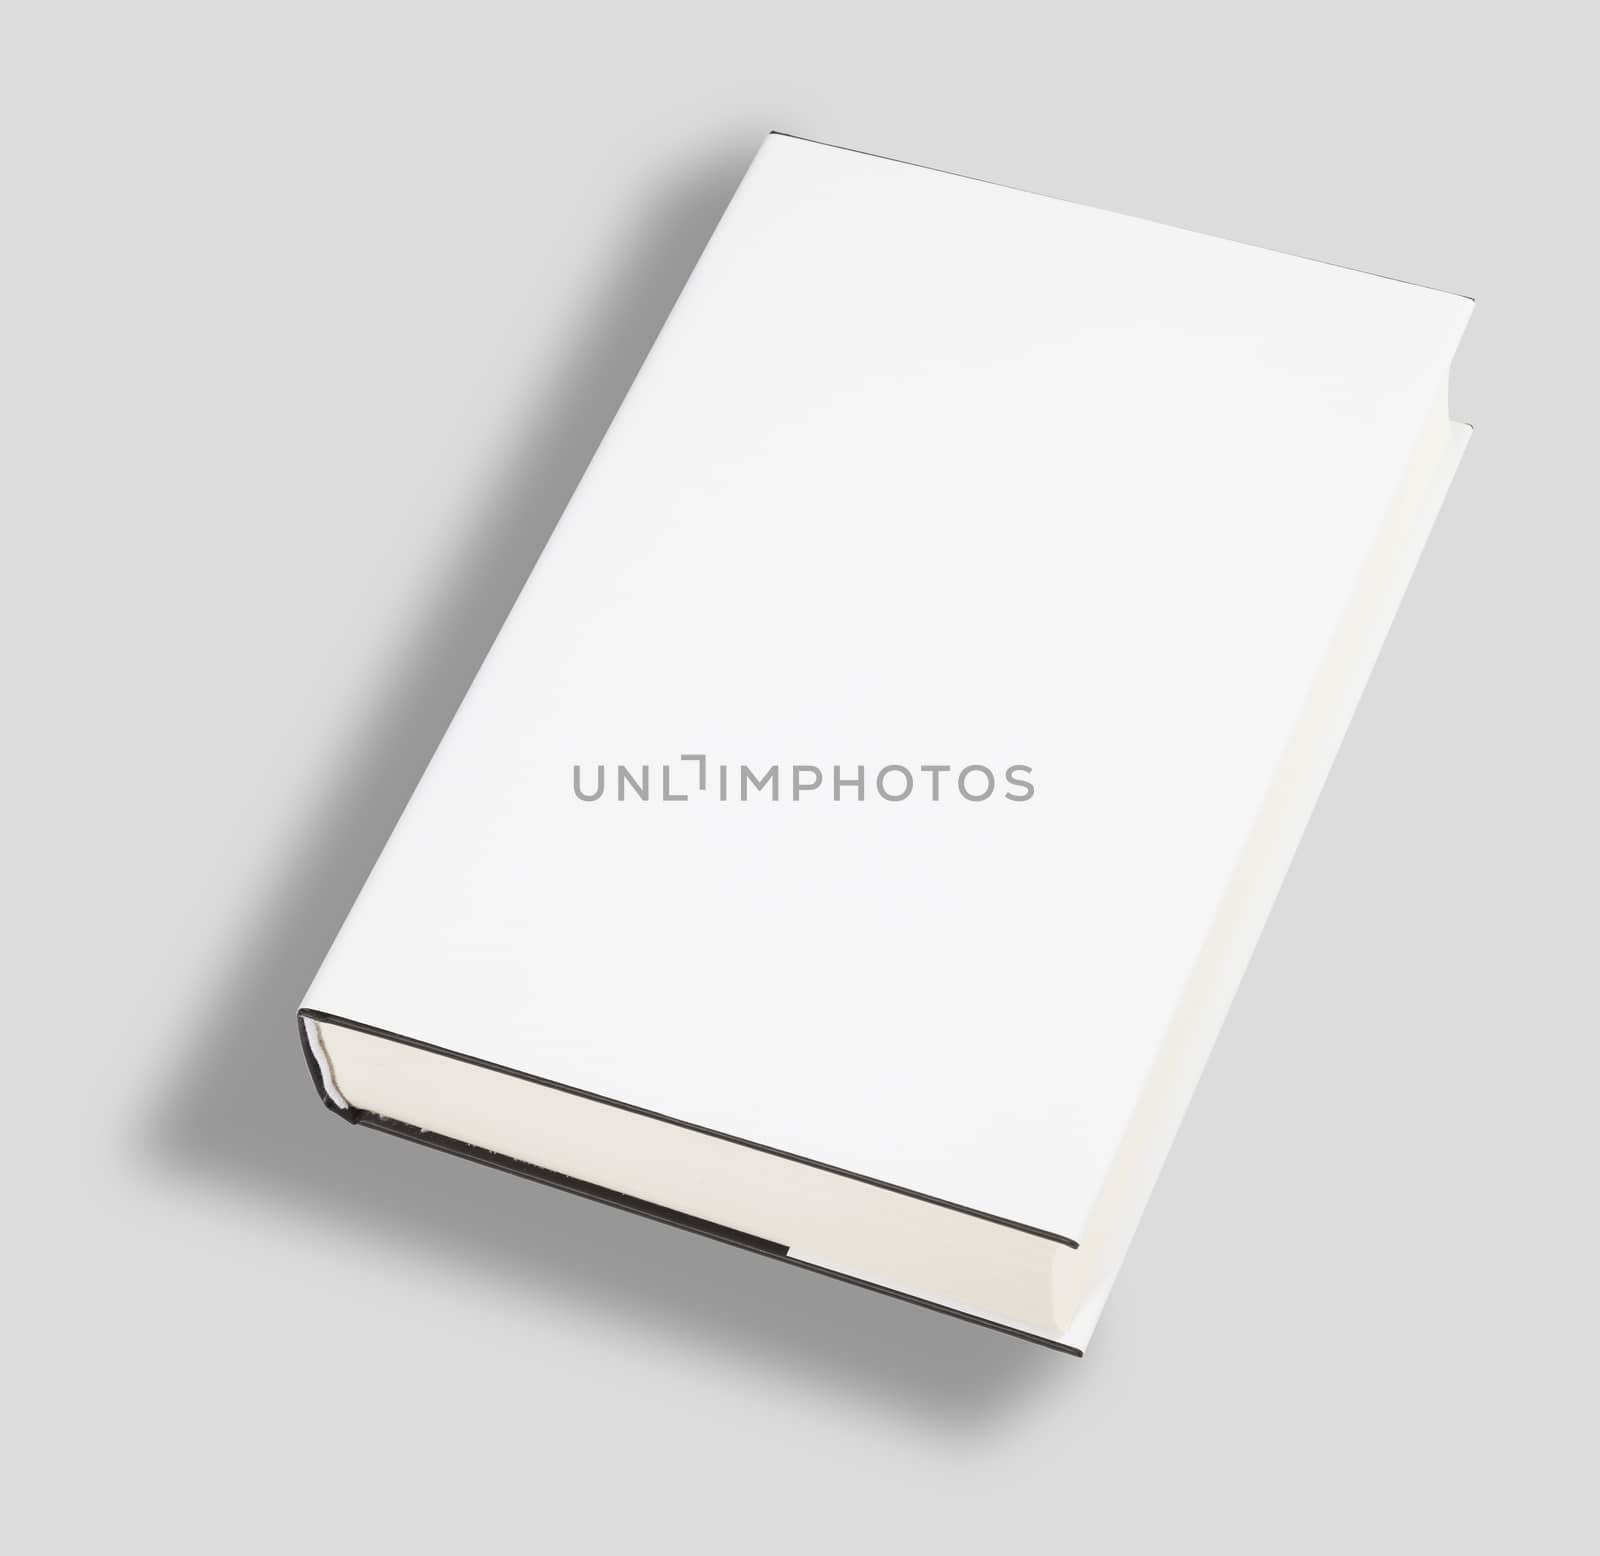 Blank book cover w clipping path by hanusst